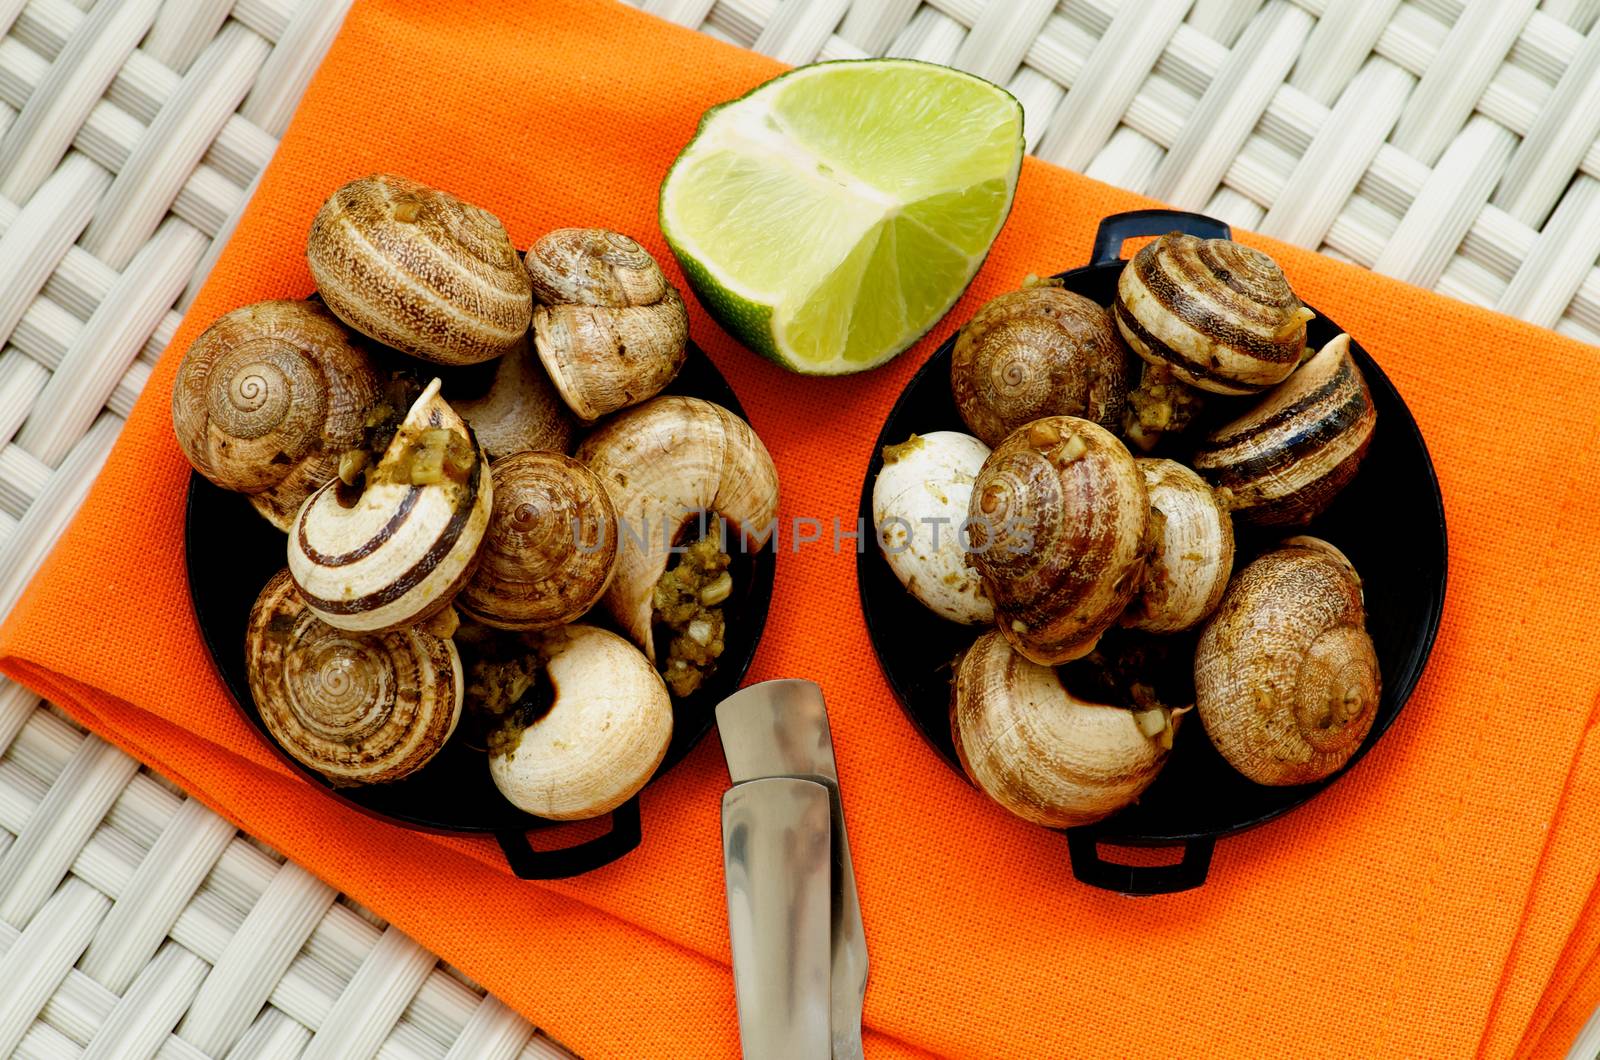 Delicious Escargot with Garlic Butter in Black Bowls with Sliced Lime closeup on Orange Napkin. Top View